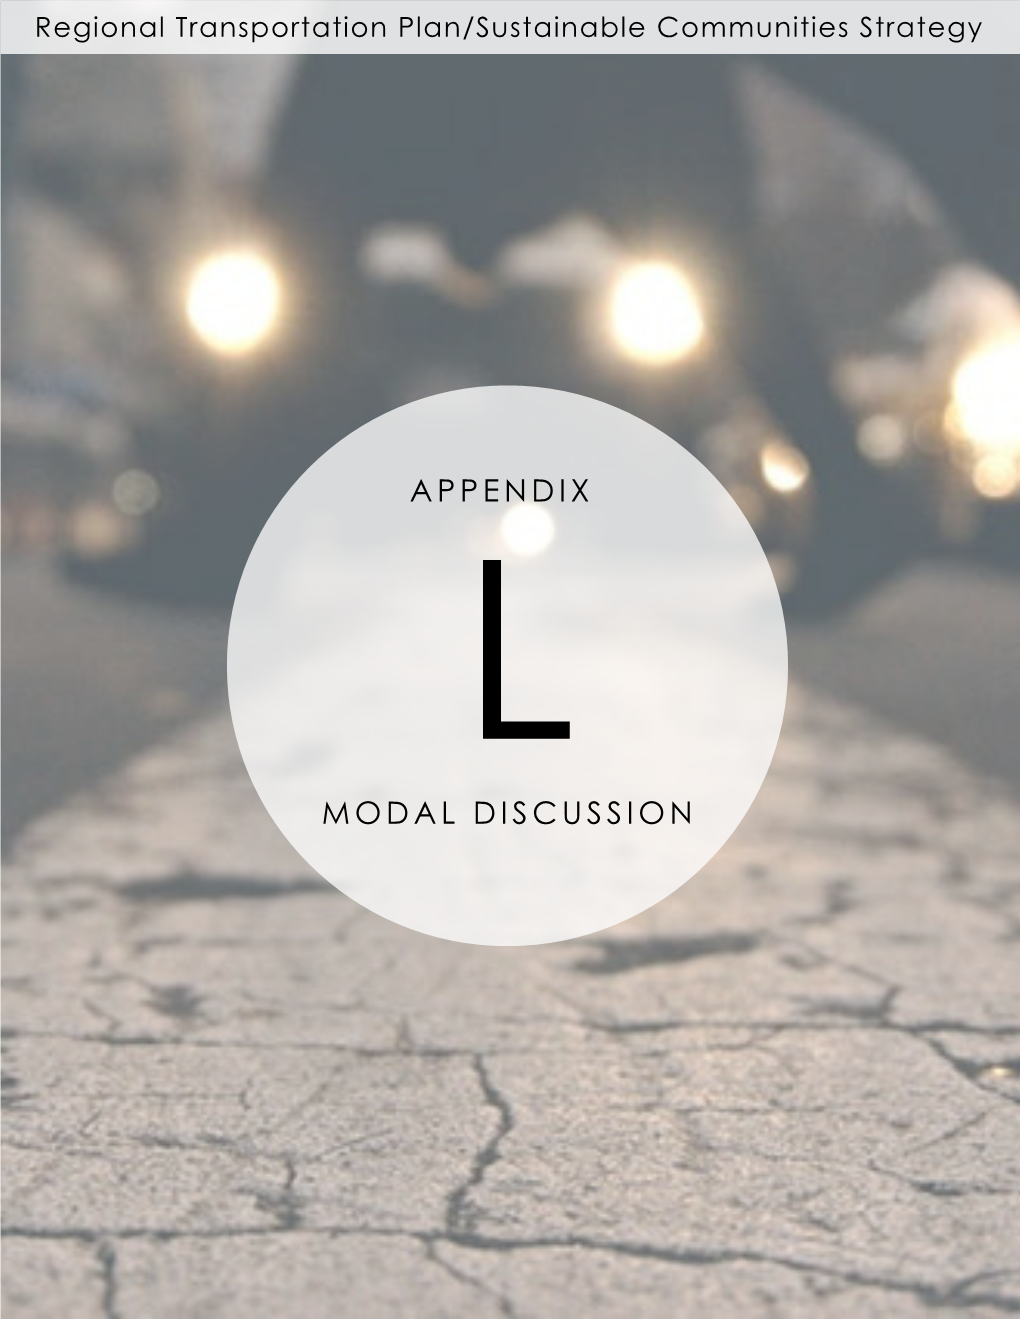 Modal Discussion